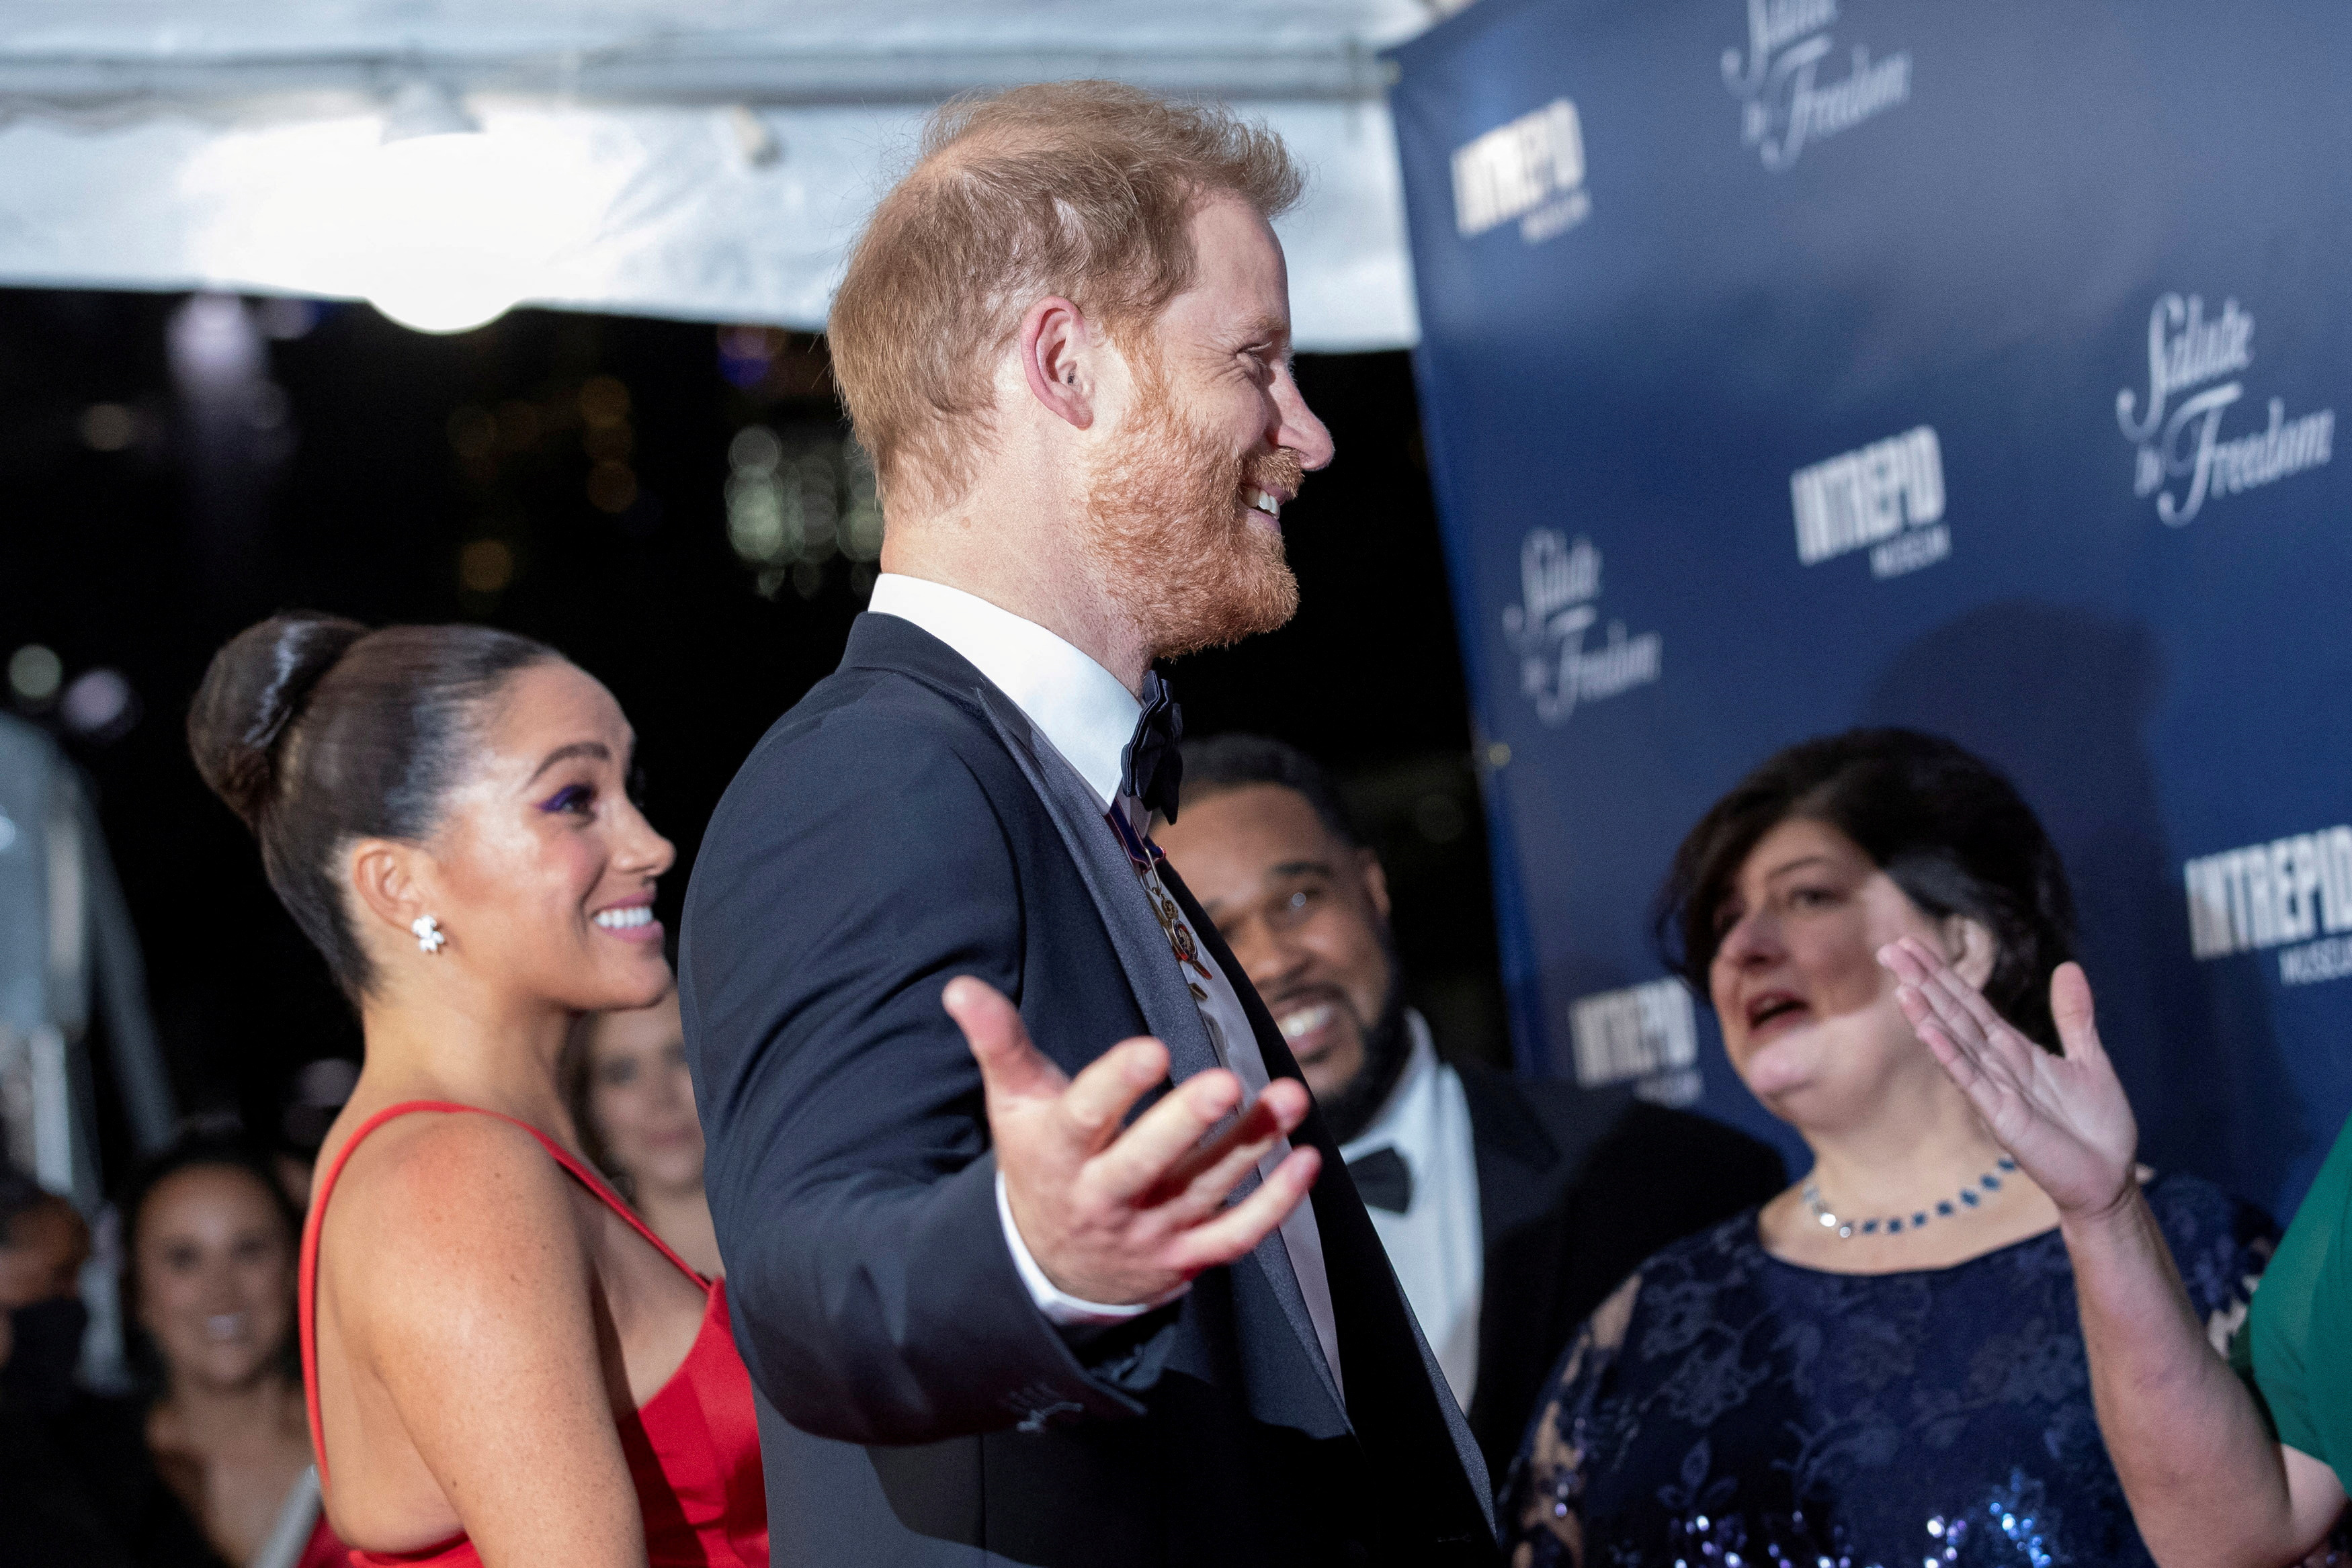 Britain's Prince Harry and Meghan Markle, Duke and Duchess of Sussex, at a gala at the Intrepid Sea, Air & Space Museum in New York City, U.S.